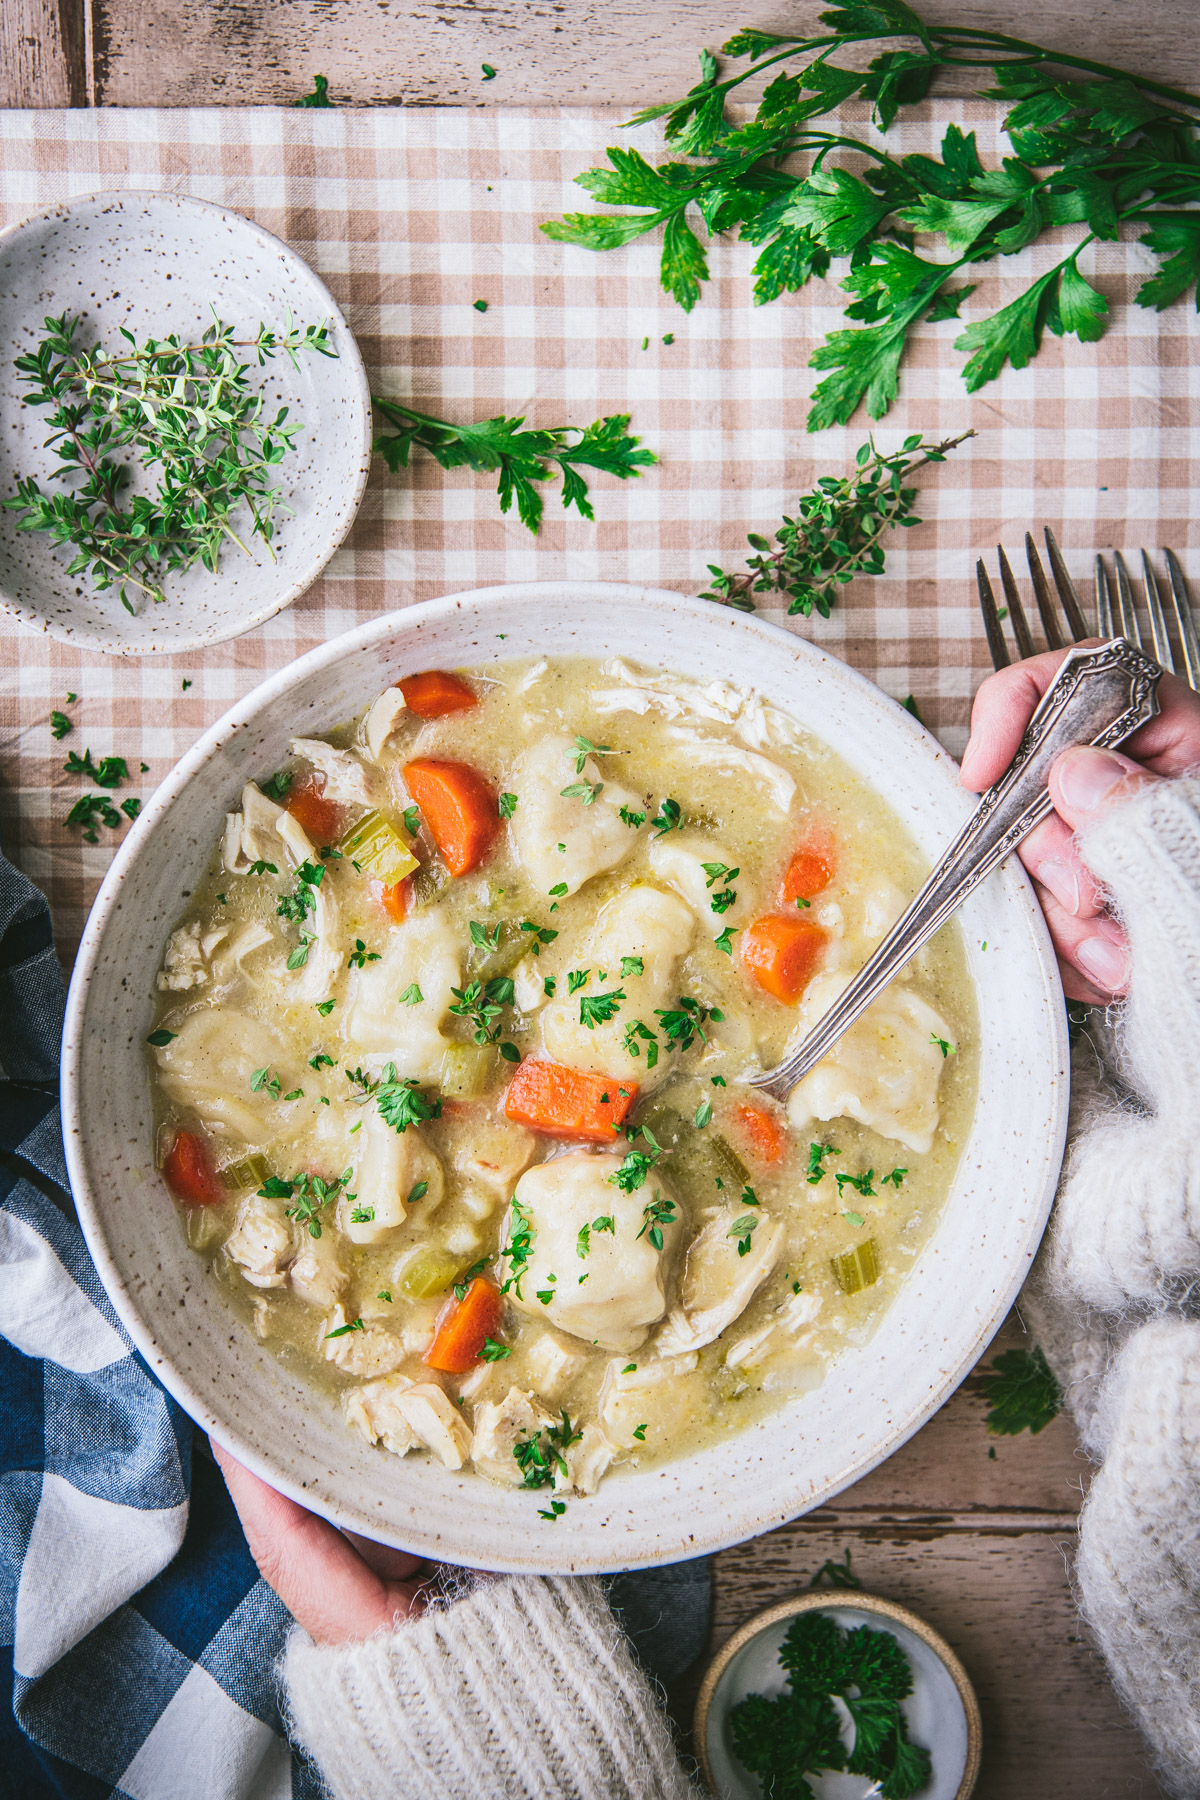 An over head image of a large bowl of crockpot chicken and dumplings. A woman's arms are pictured holding the bowl and a silver spoon.